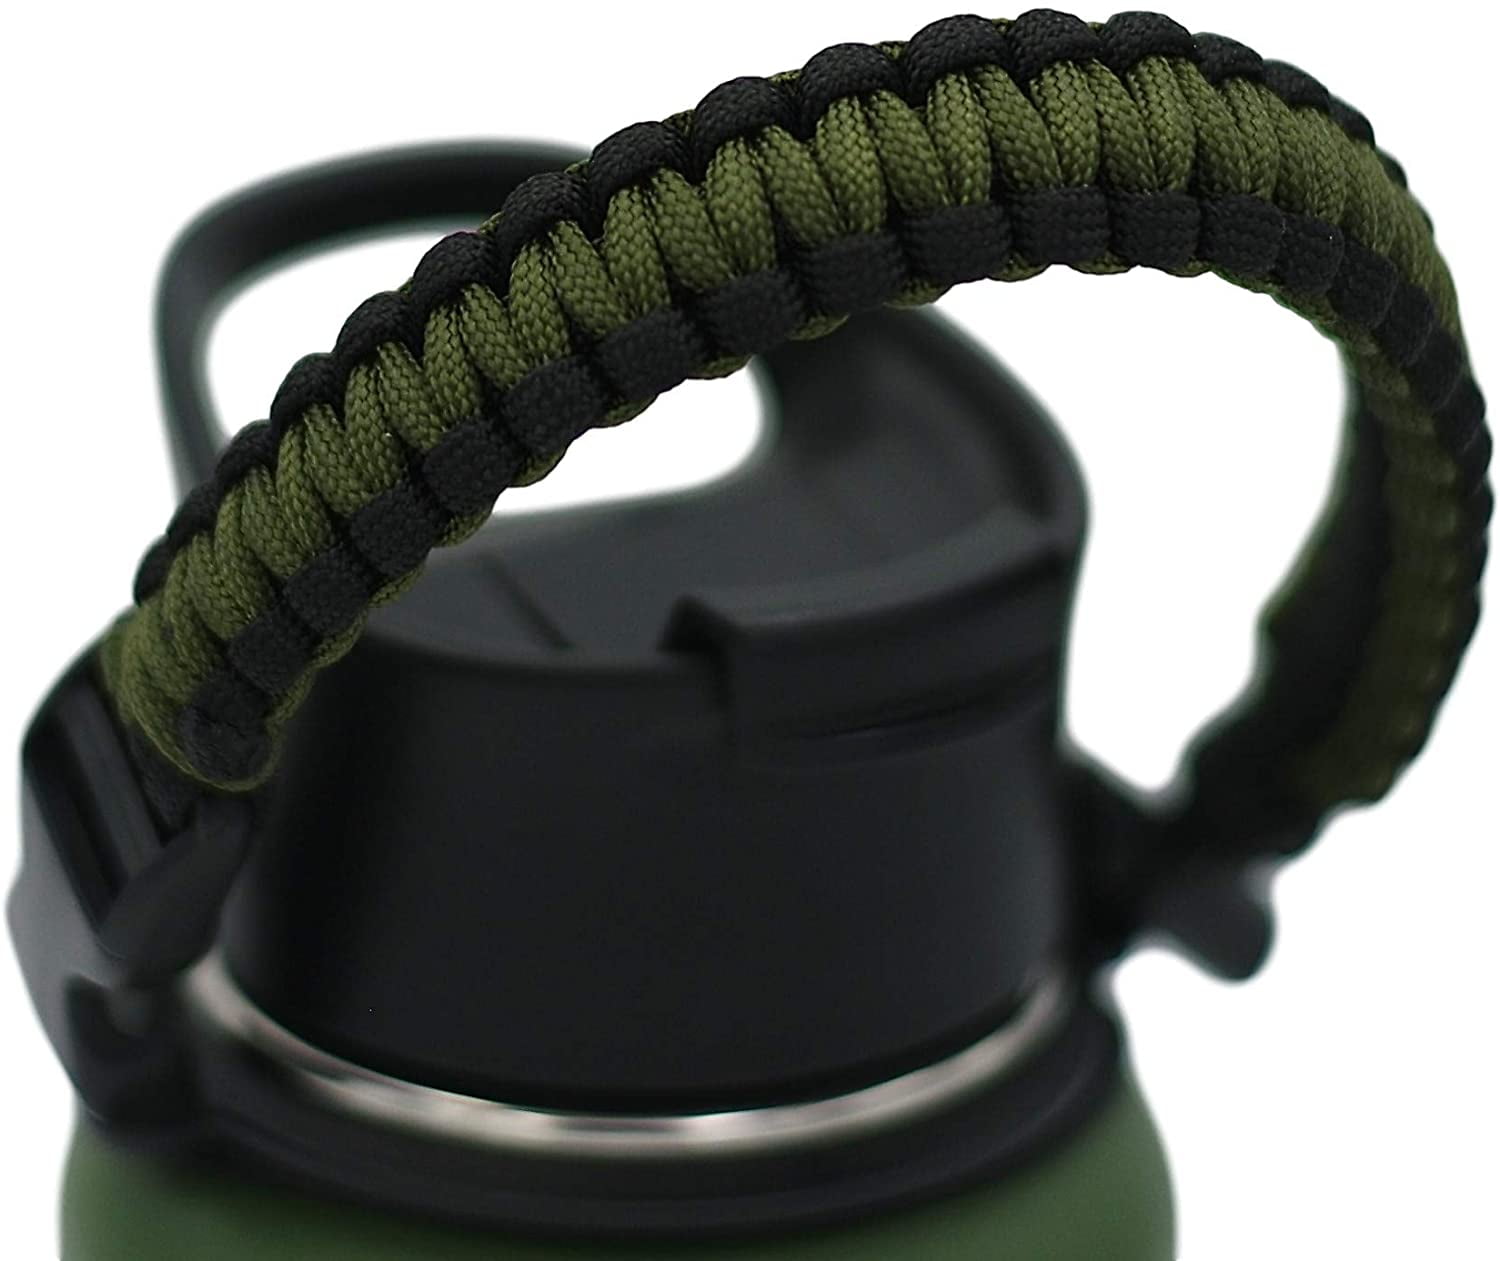 Hydro Flask Handle, Flaskars Paracord Carrier Survival Strap Cord with  Safety Ring and Carabiner for Hydro Flask Nalgen…